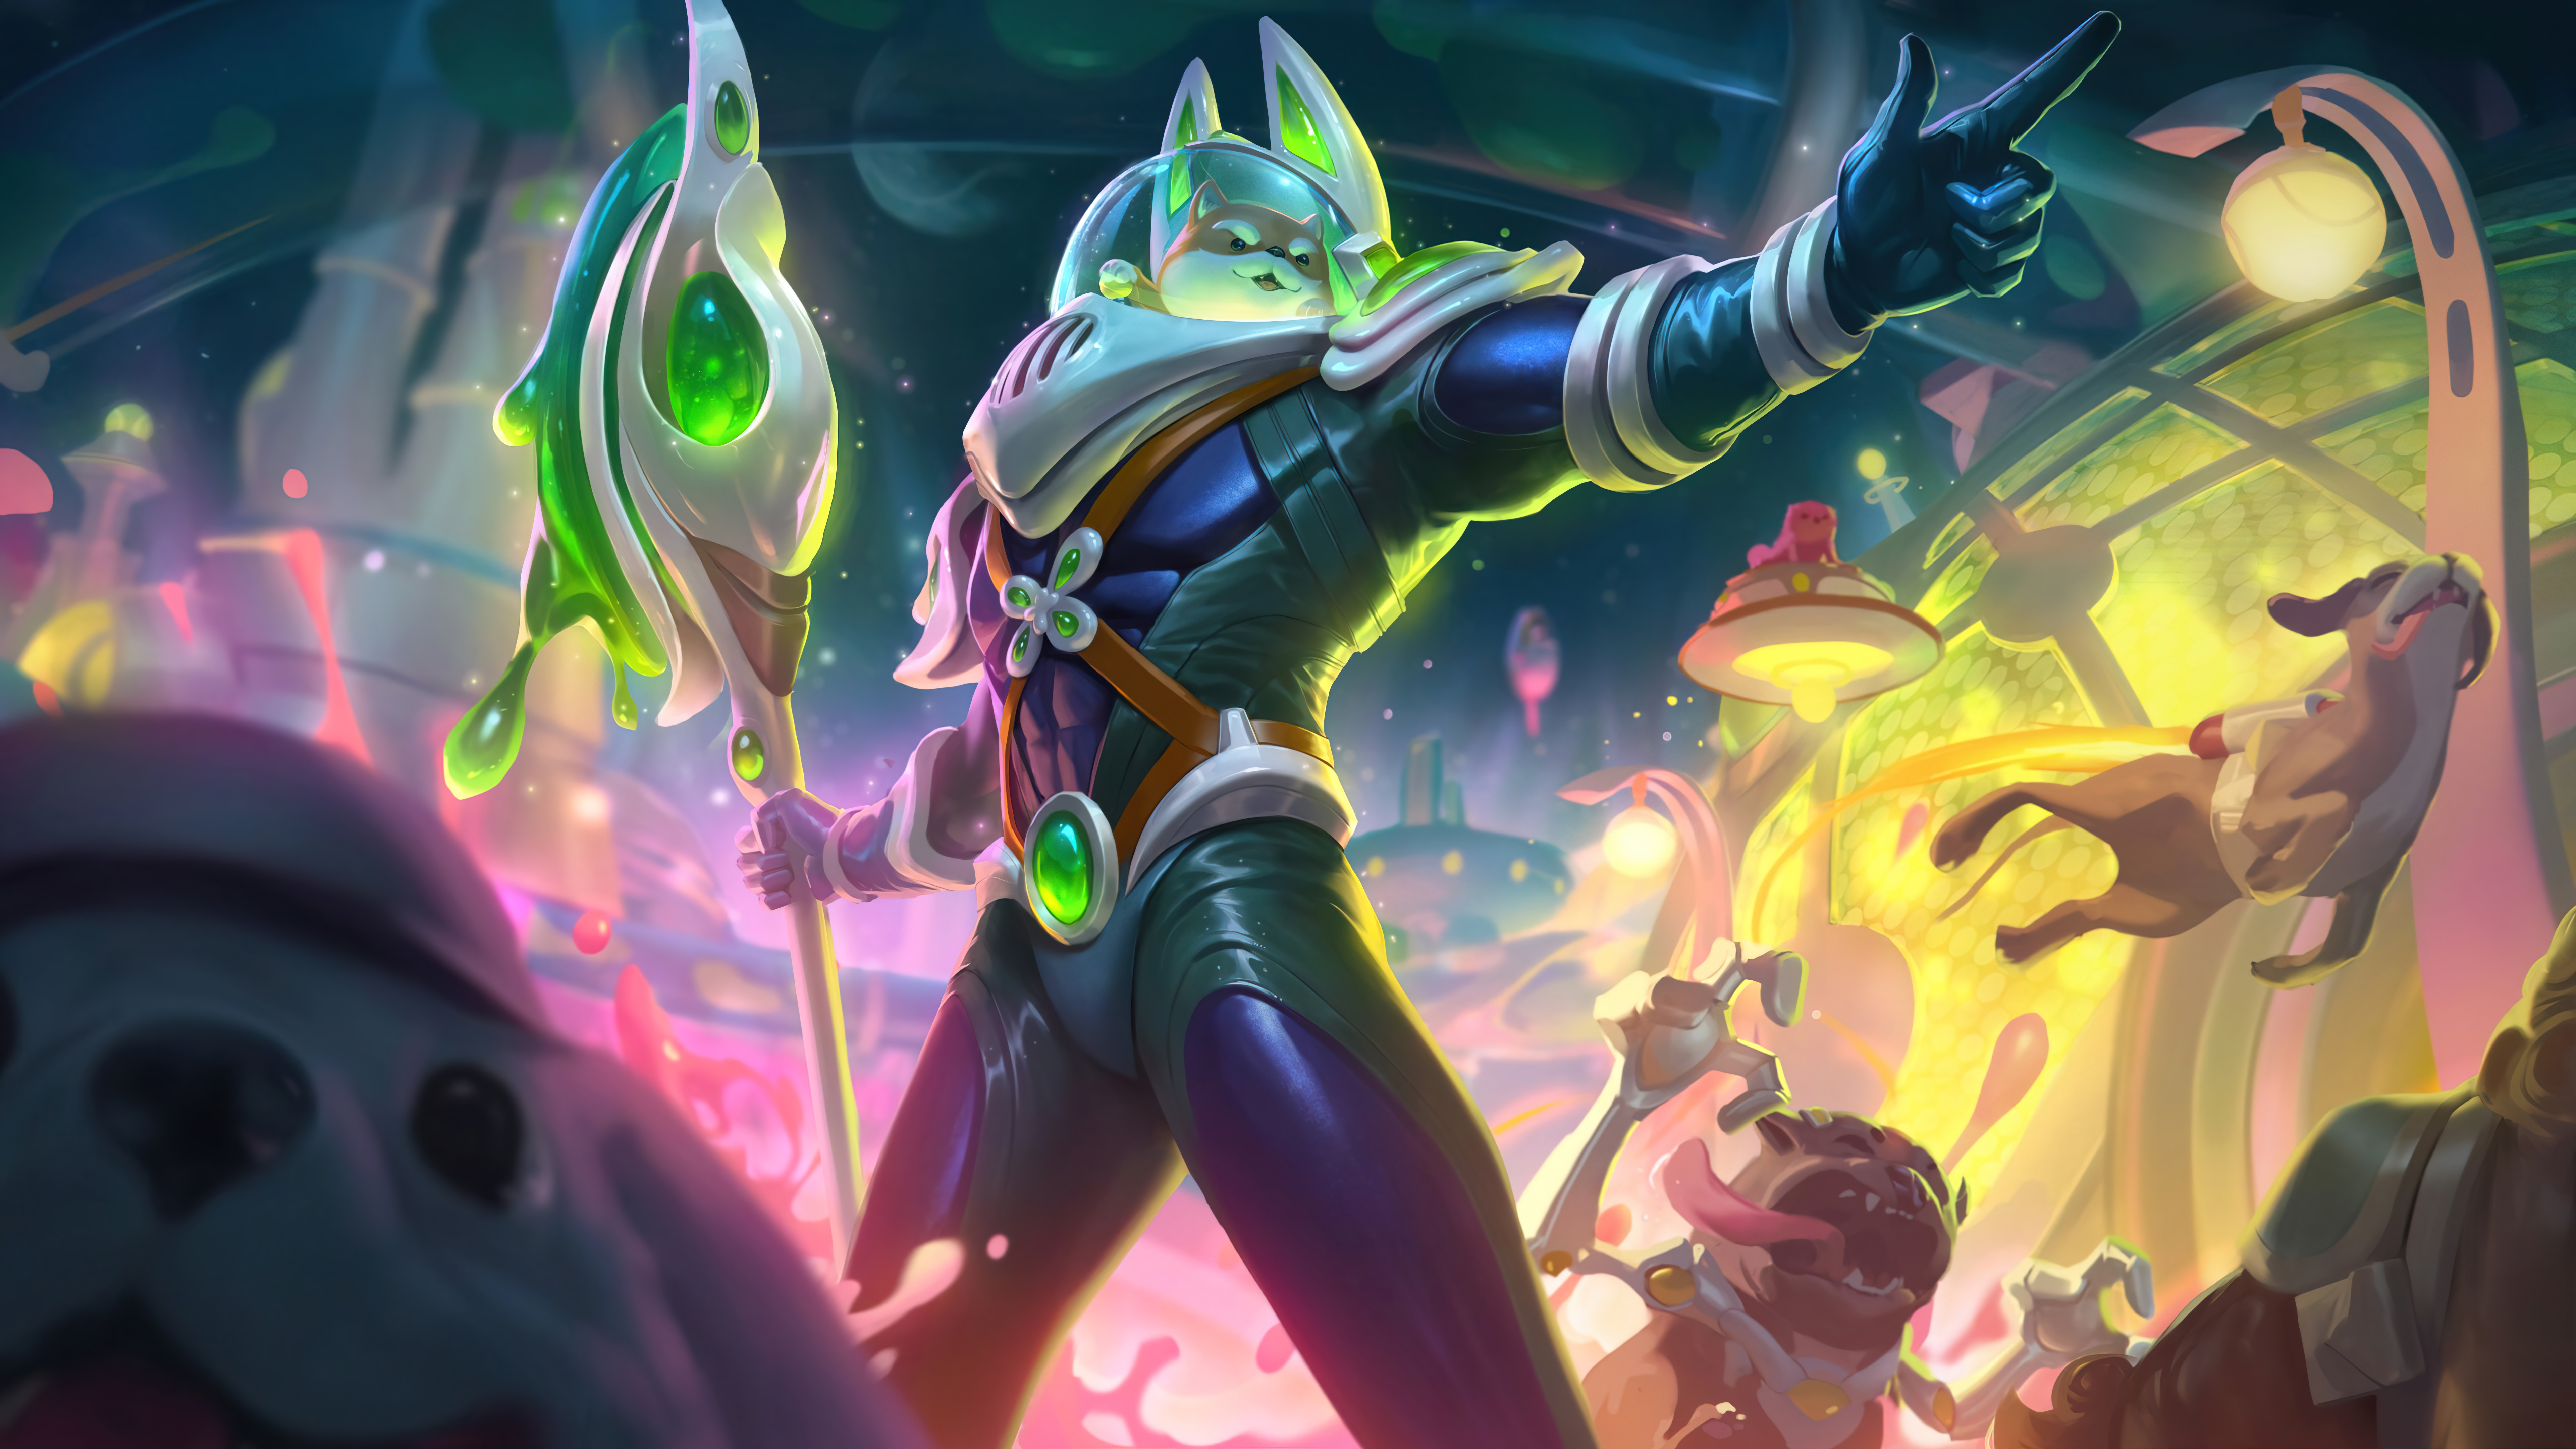 General 7680x4320 Space Groove nasus Nasus (League of Legends) space League of Legends Riot Games cats michis 4K dog GZG Space Groove (League of Legends) video games video game characters